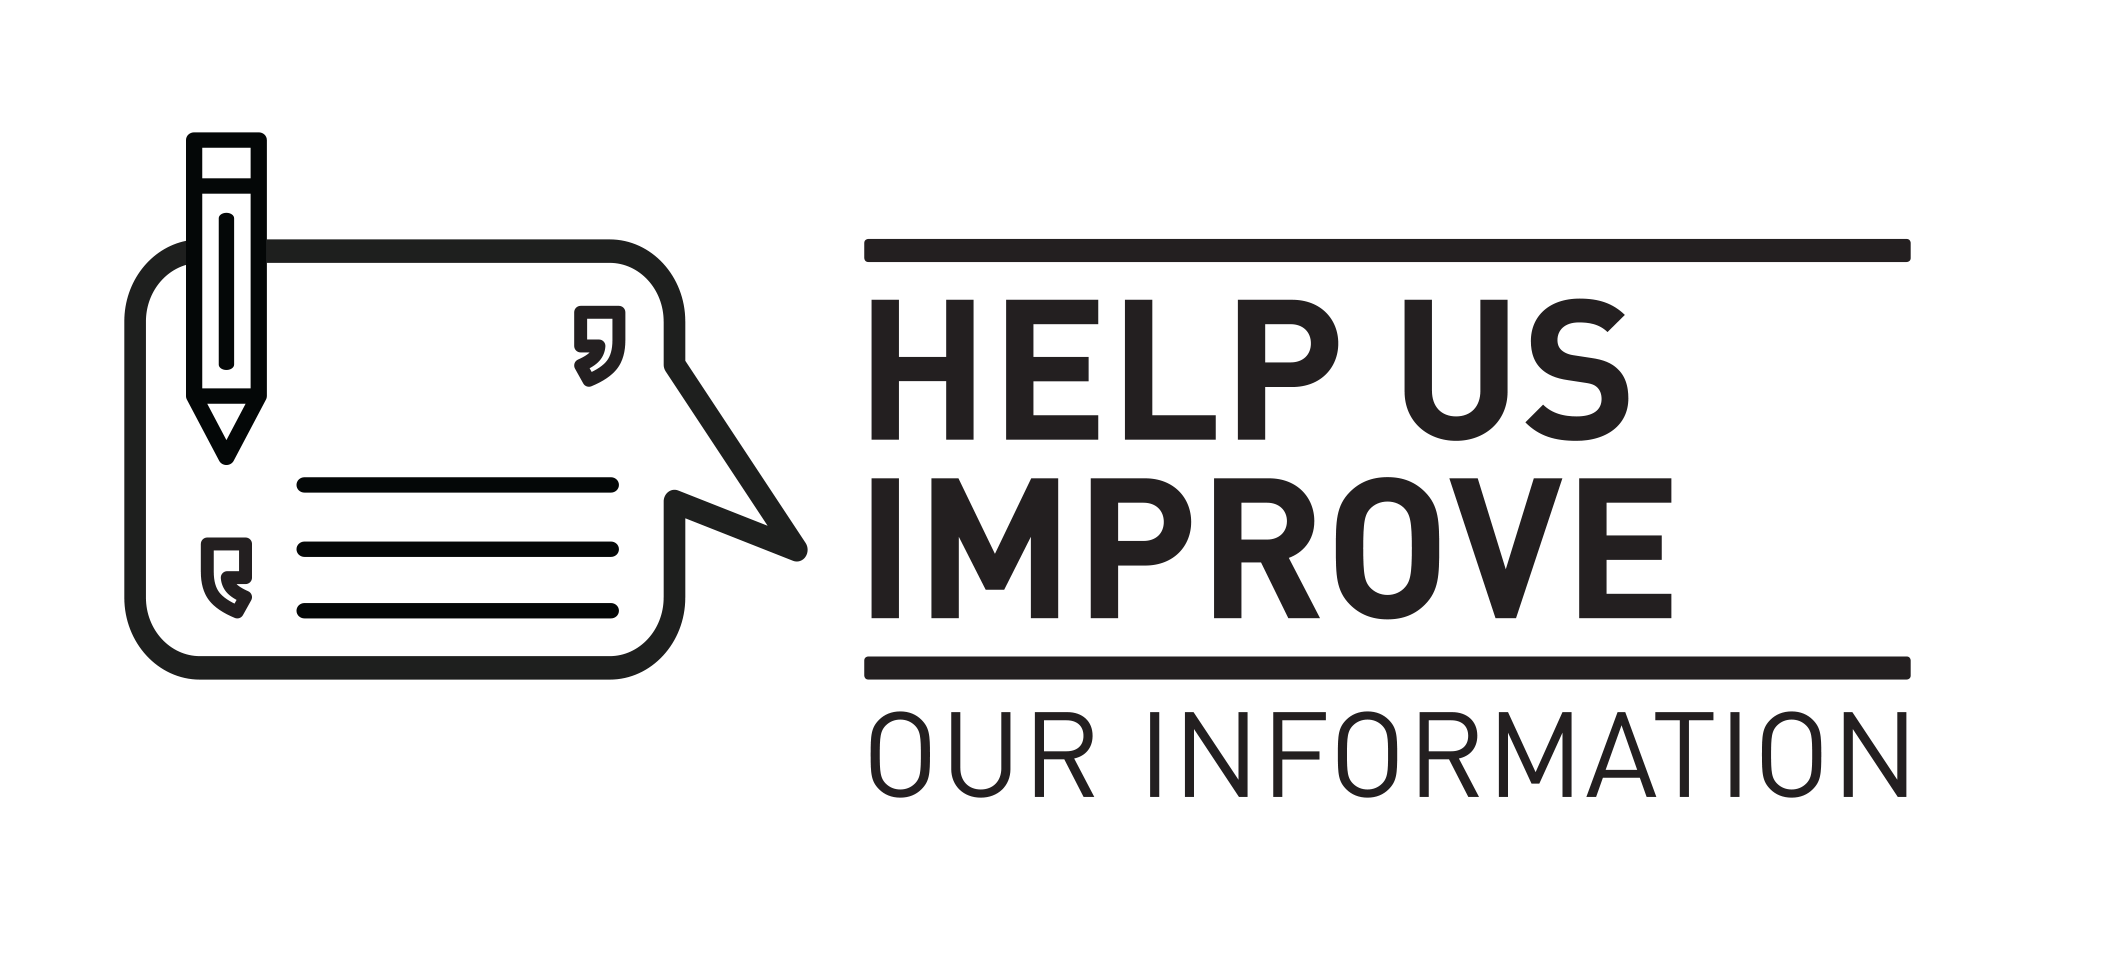 Help Us Improve Our Information